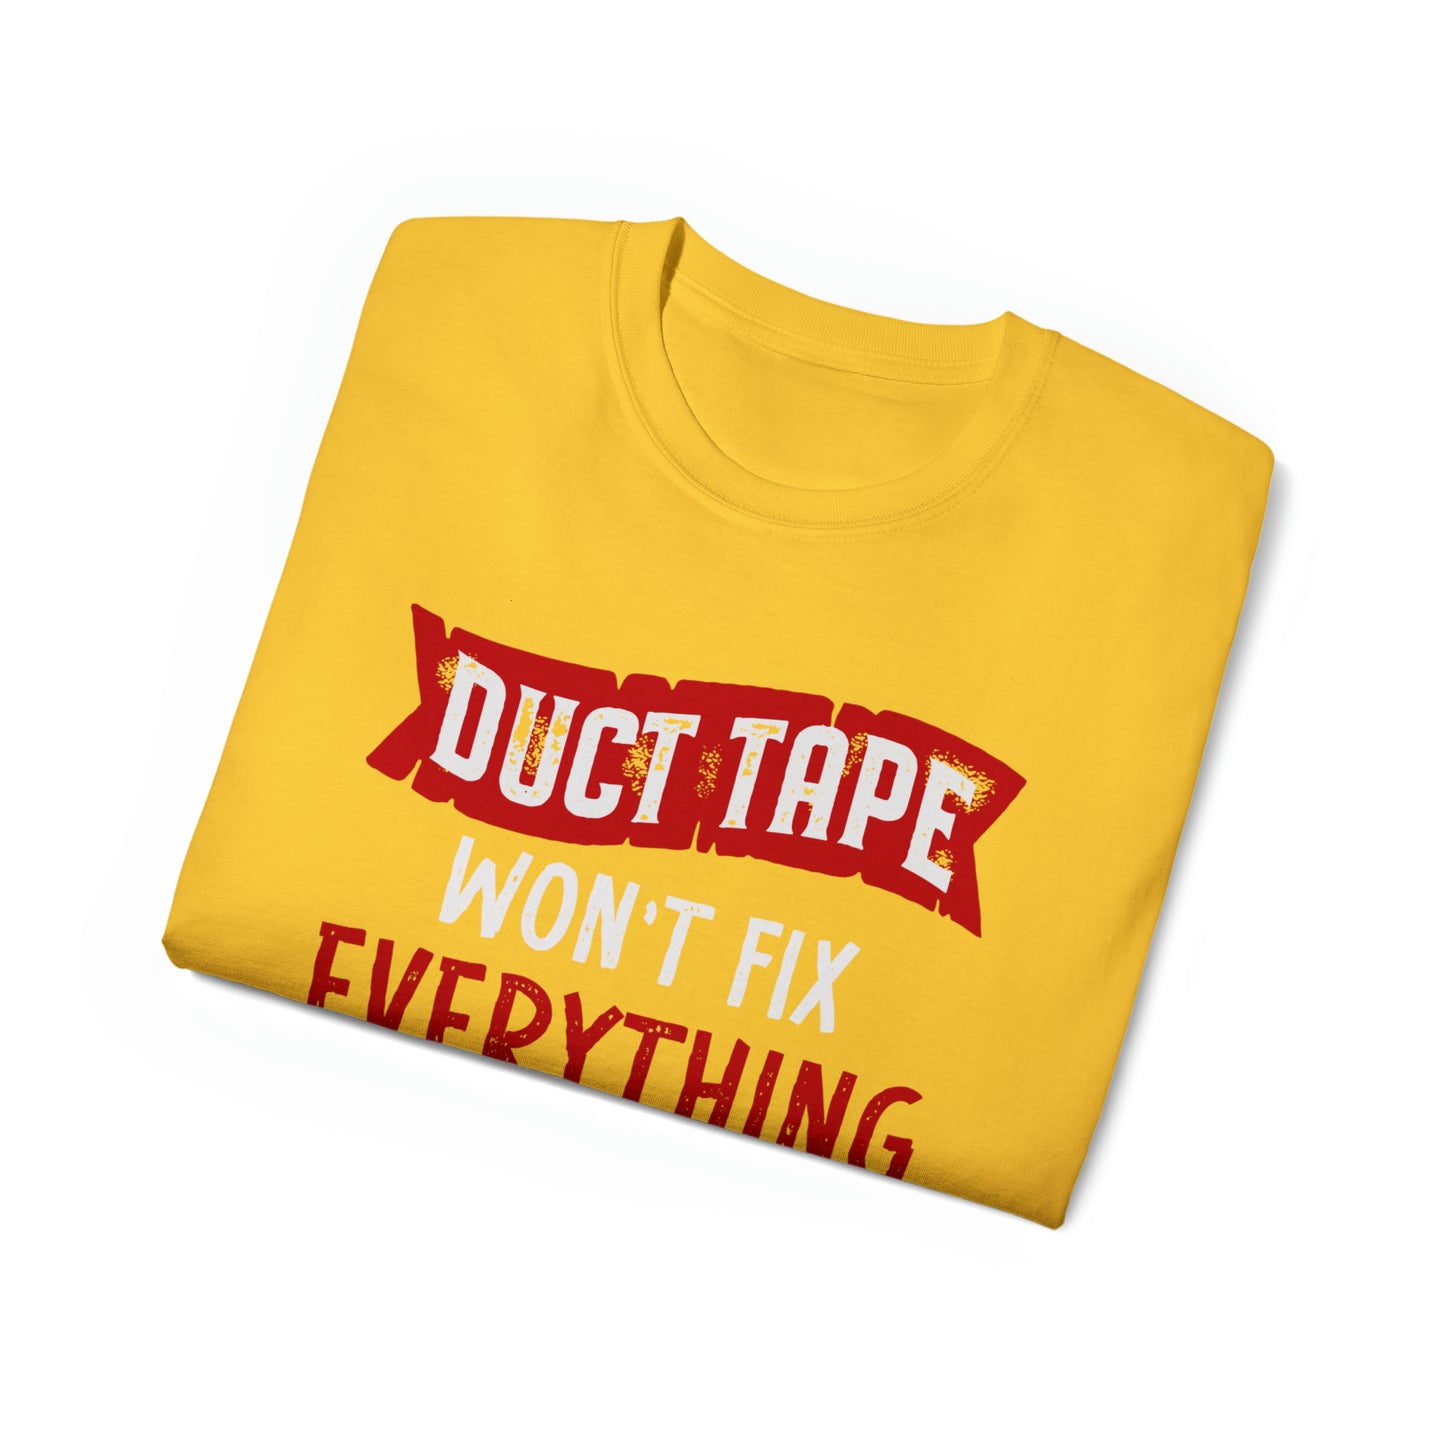 Duct Tape Won't Fix Everything But It Will Muffle Screams Tee